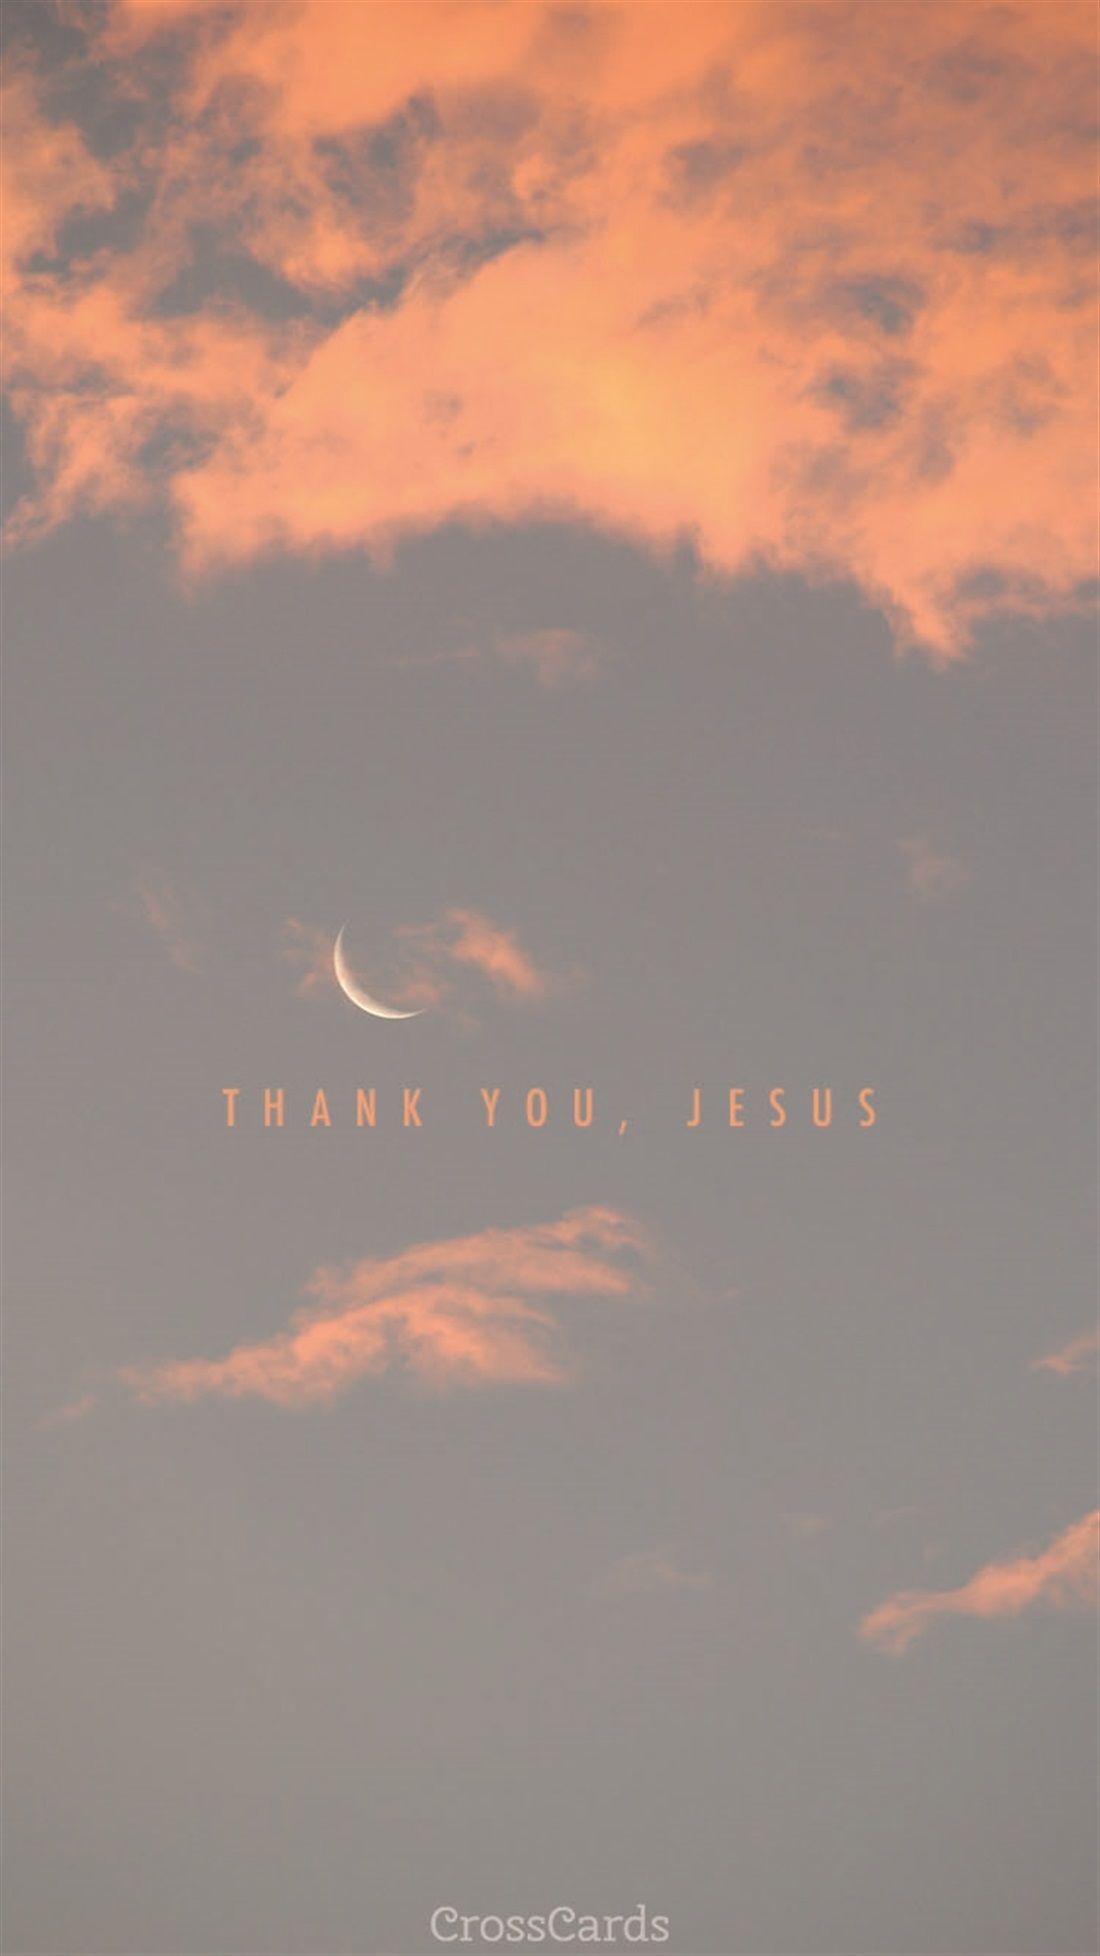 Thank You, Jesus Wallpaper and Mobile Background